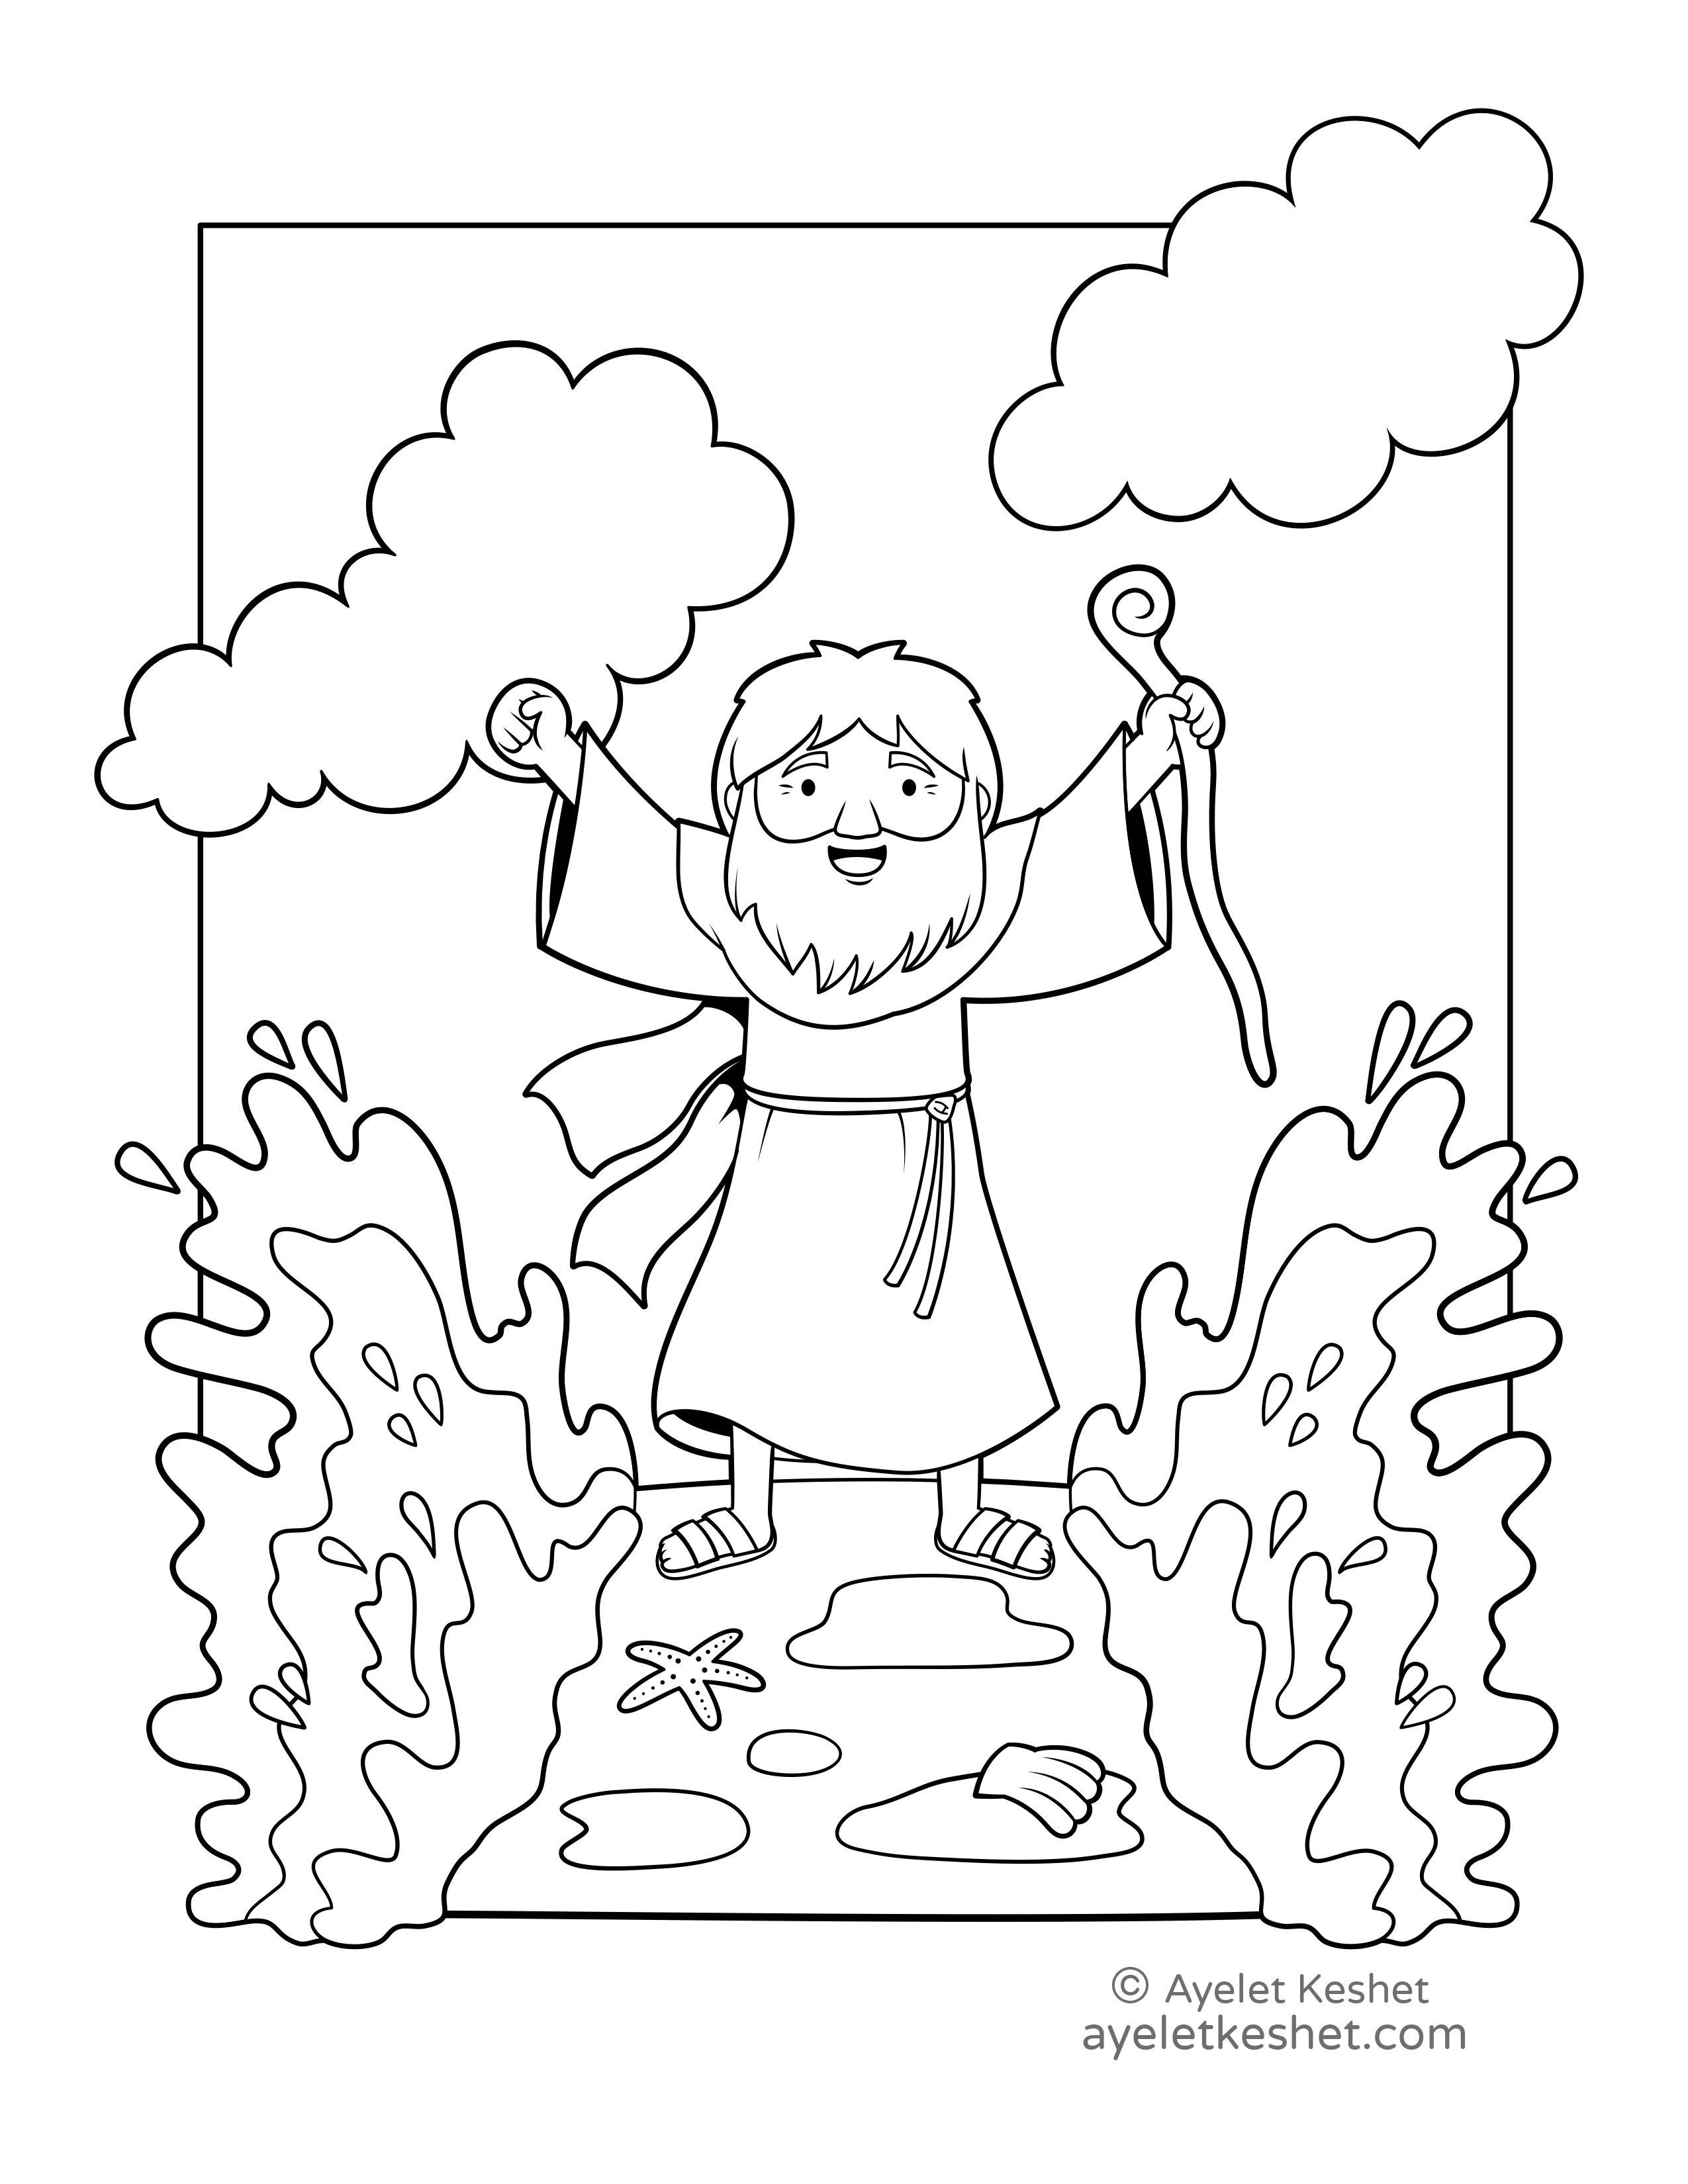 Passover coloring pages with cute illustrations